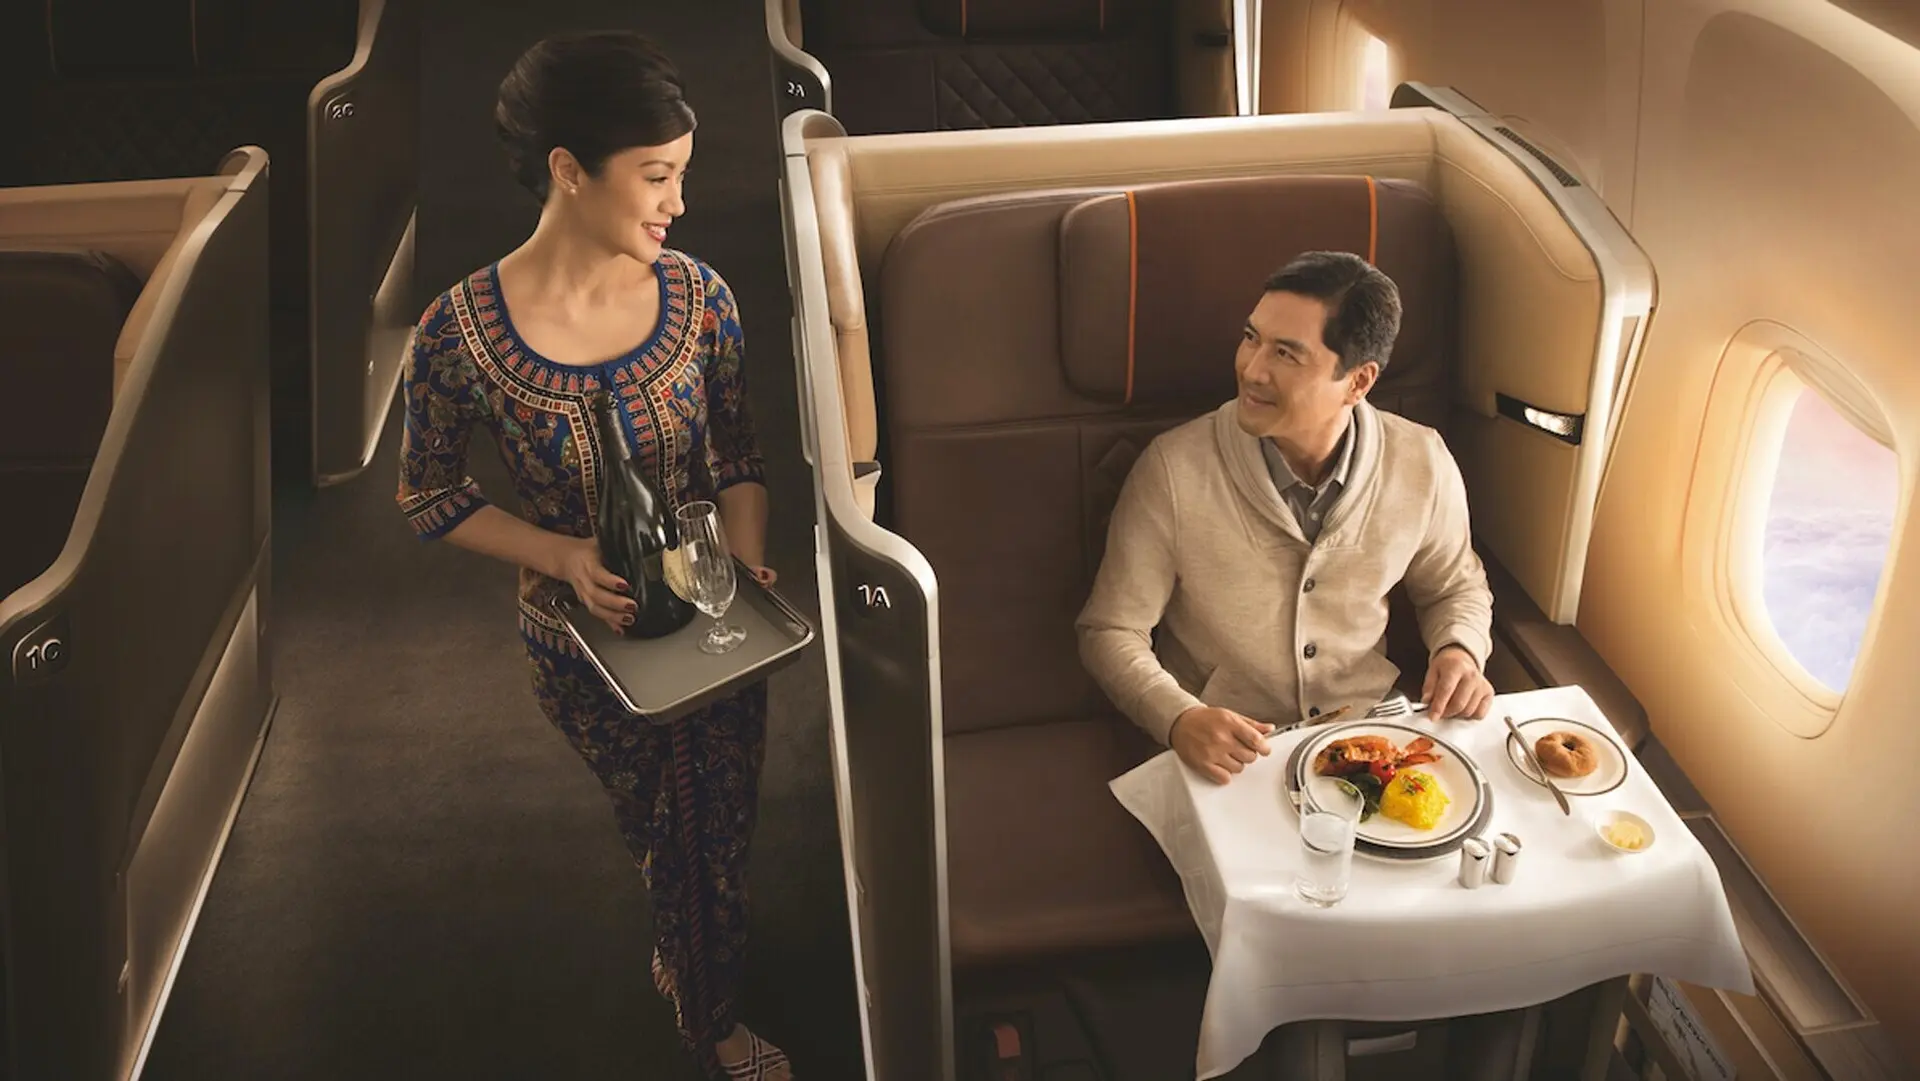 Airlines News - Singapore Airlines - haute cuisine from the UK